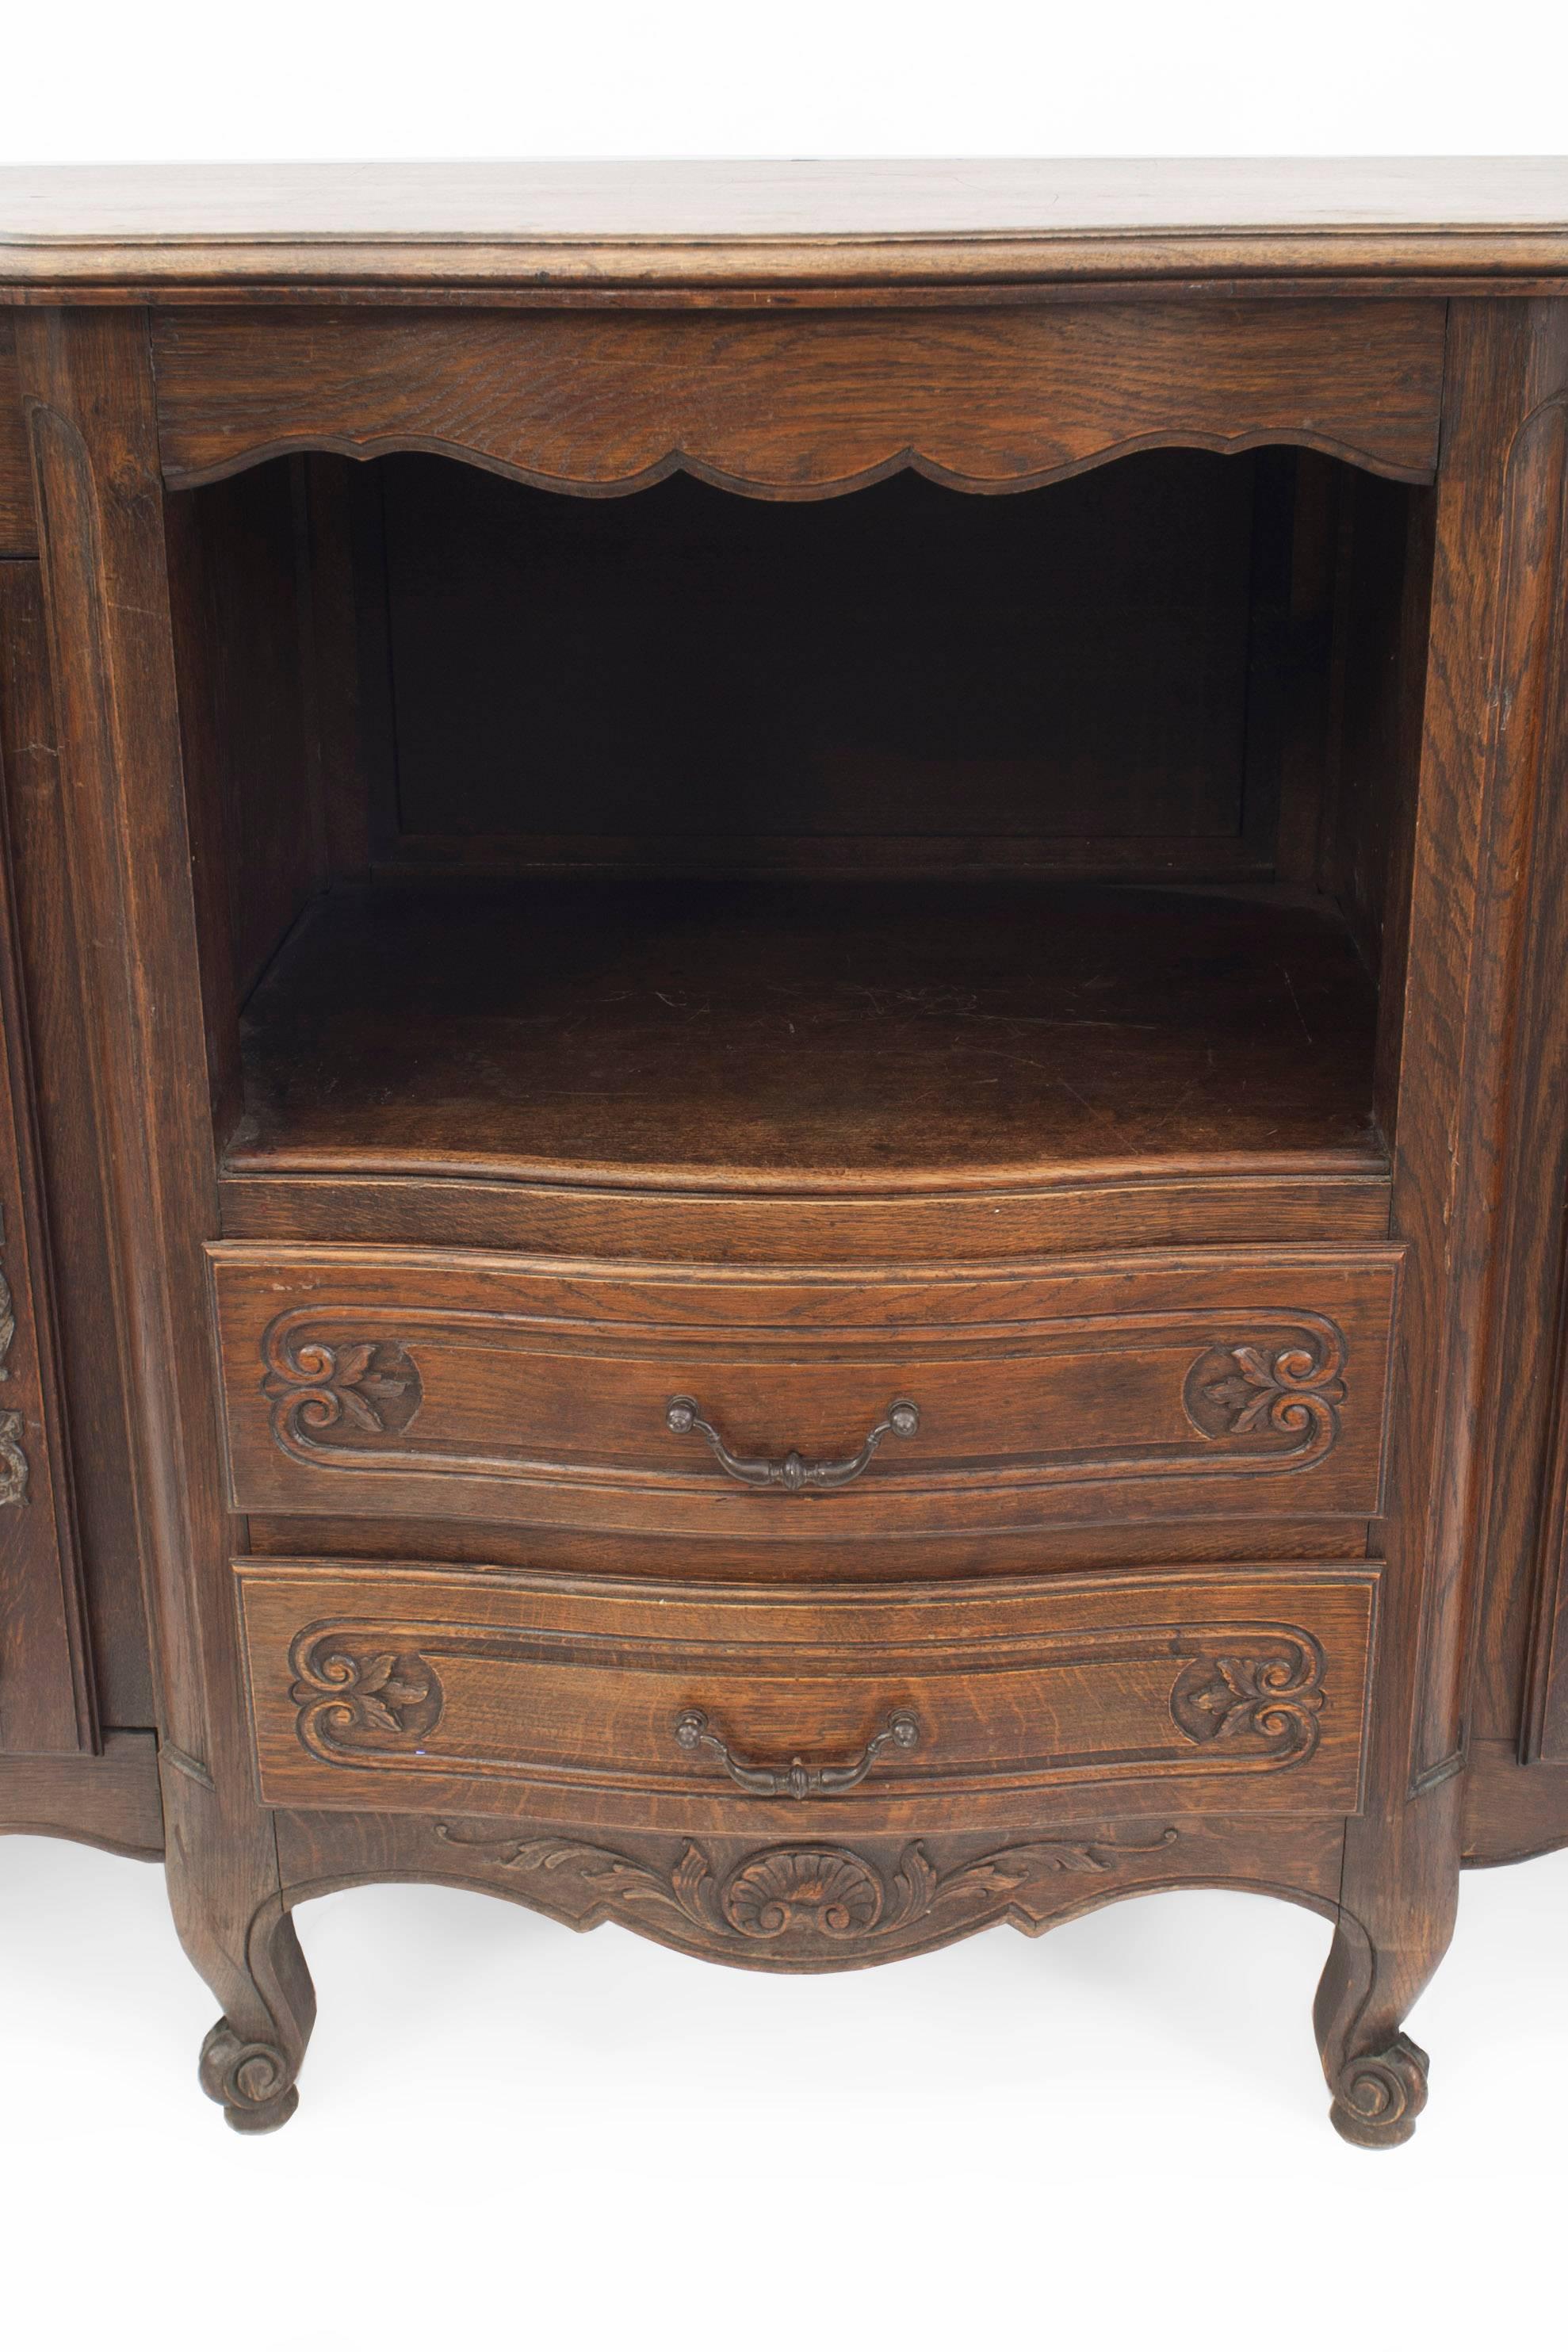 French Provincial dark stained oak sideboard / credenza with an open shelf over two drawers centering two cabinet doors with carved detail (19th century).
 